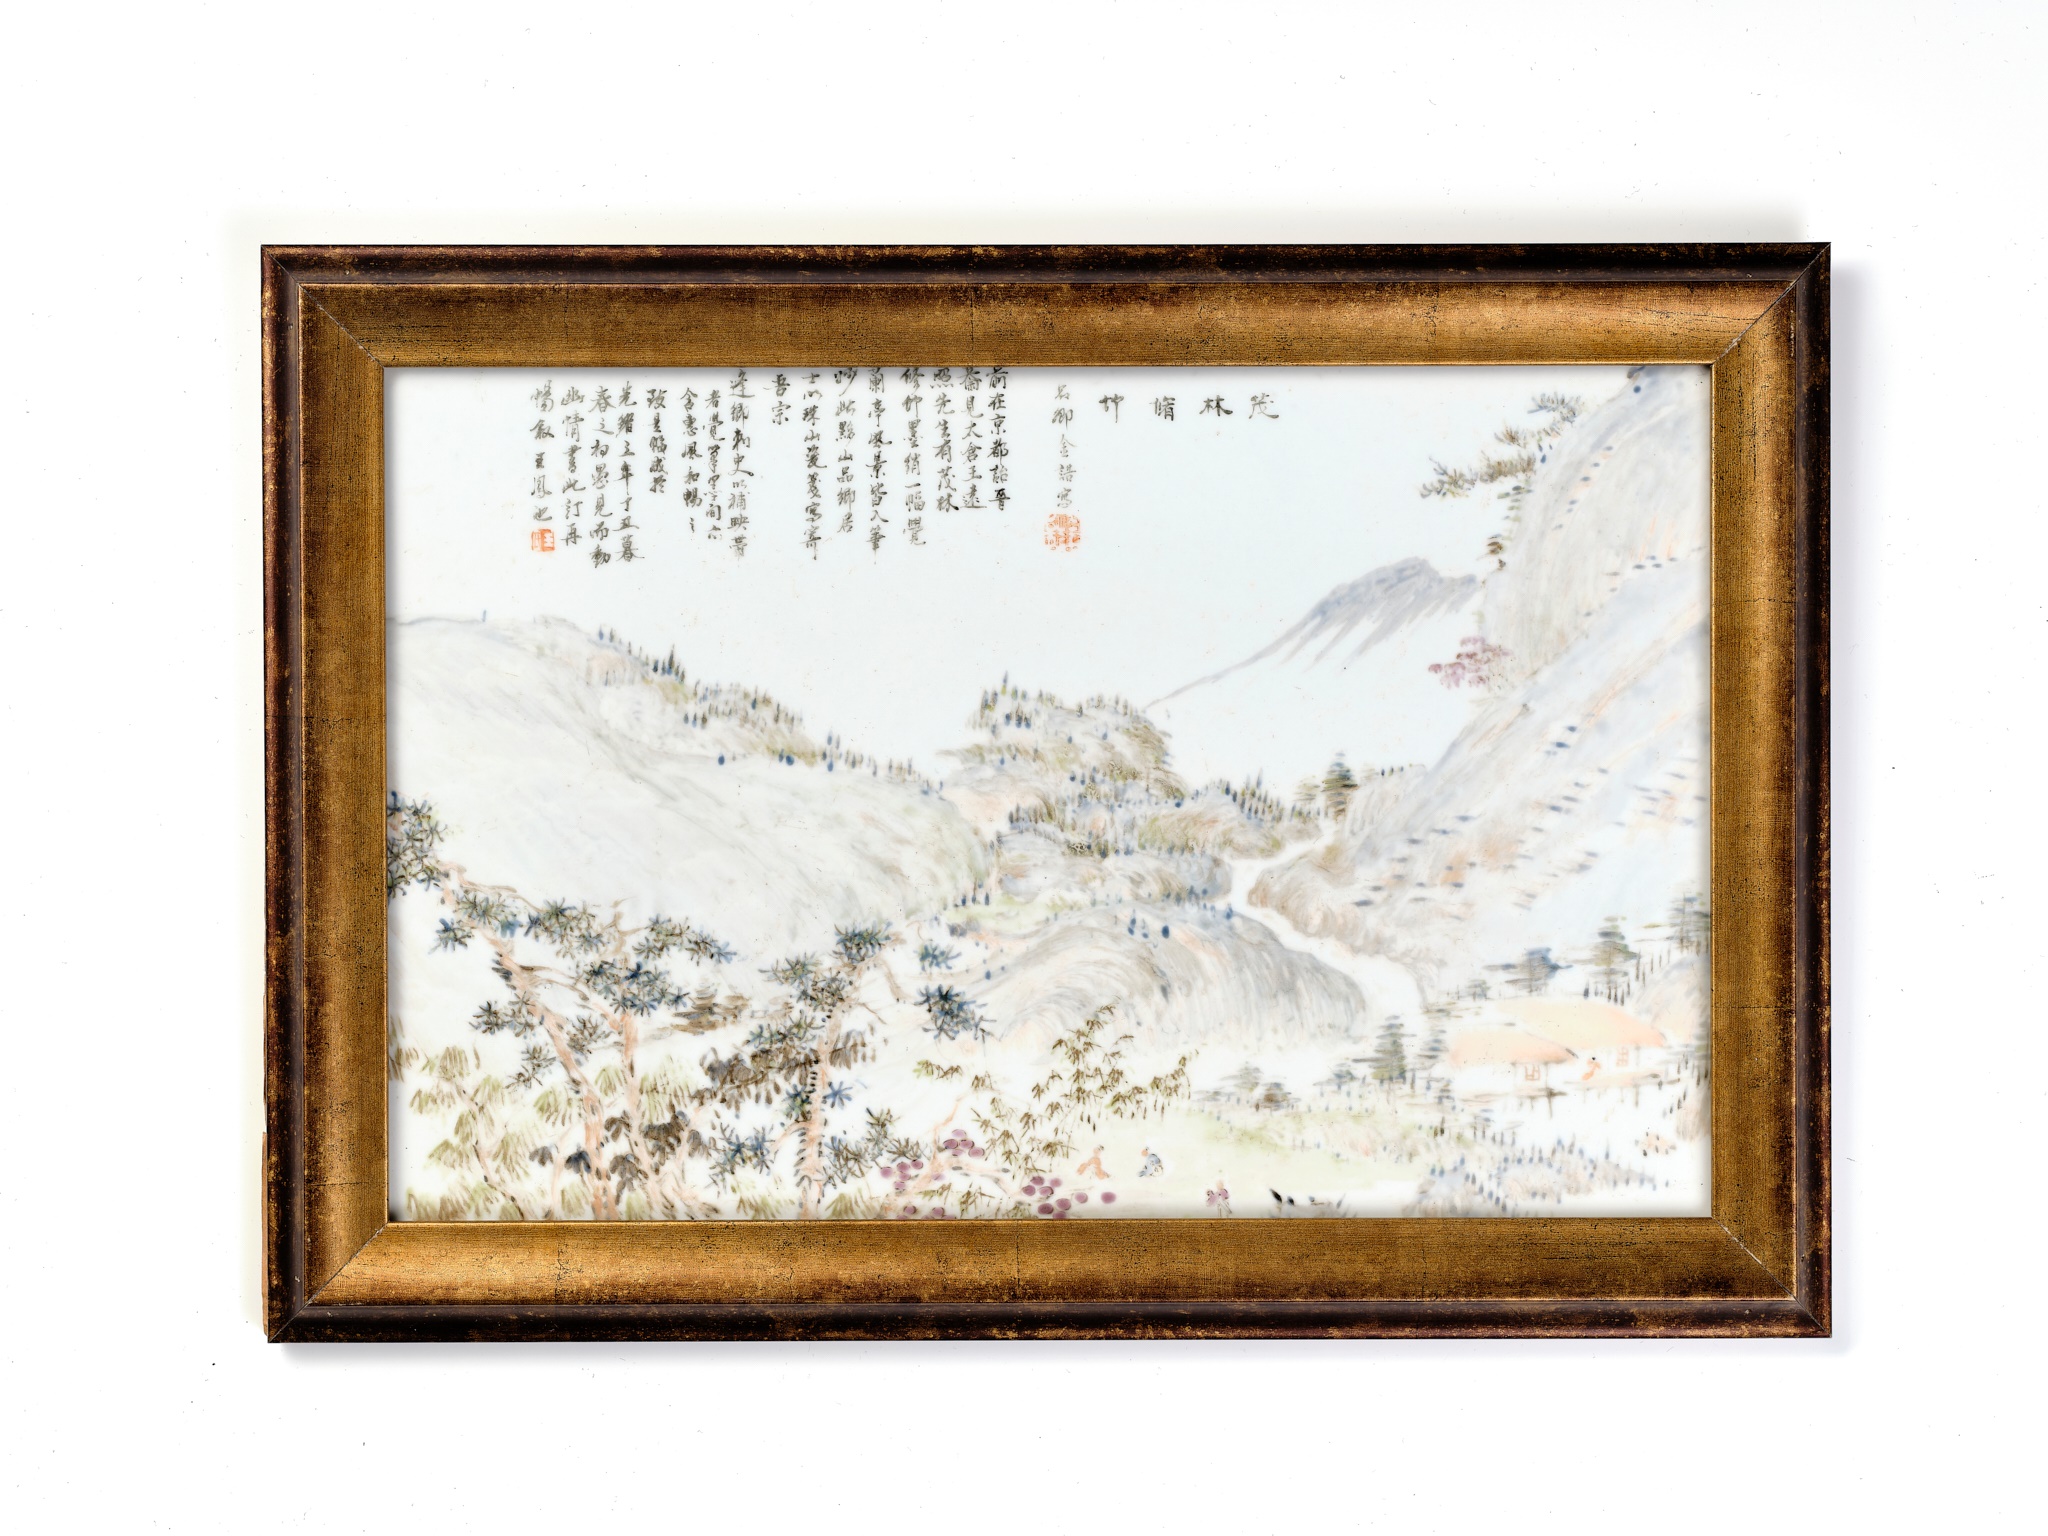 A 'QIANJIANG CAI' ENAMELED 'LUSH FORESTS AND HIGH BAMBOO' PLAQUE, BY JIN PINQING (1862-1908) - Image 2 of 9